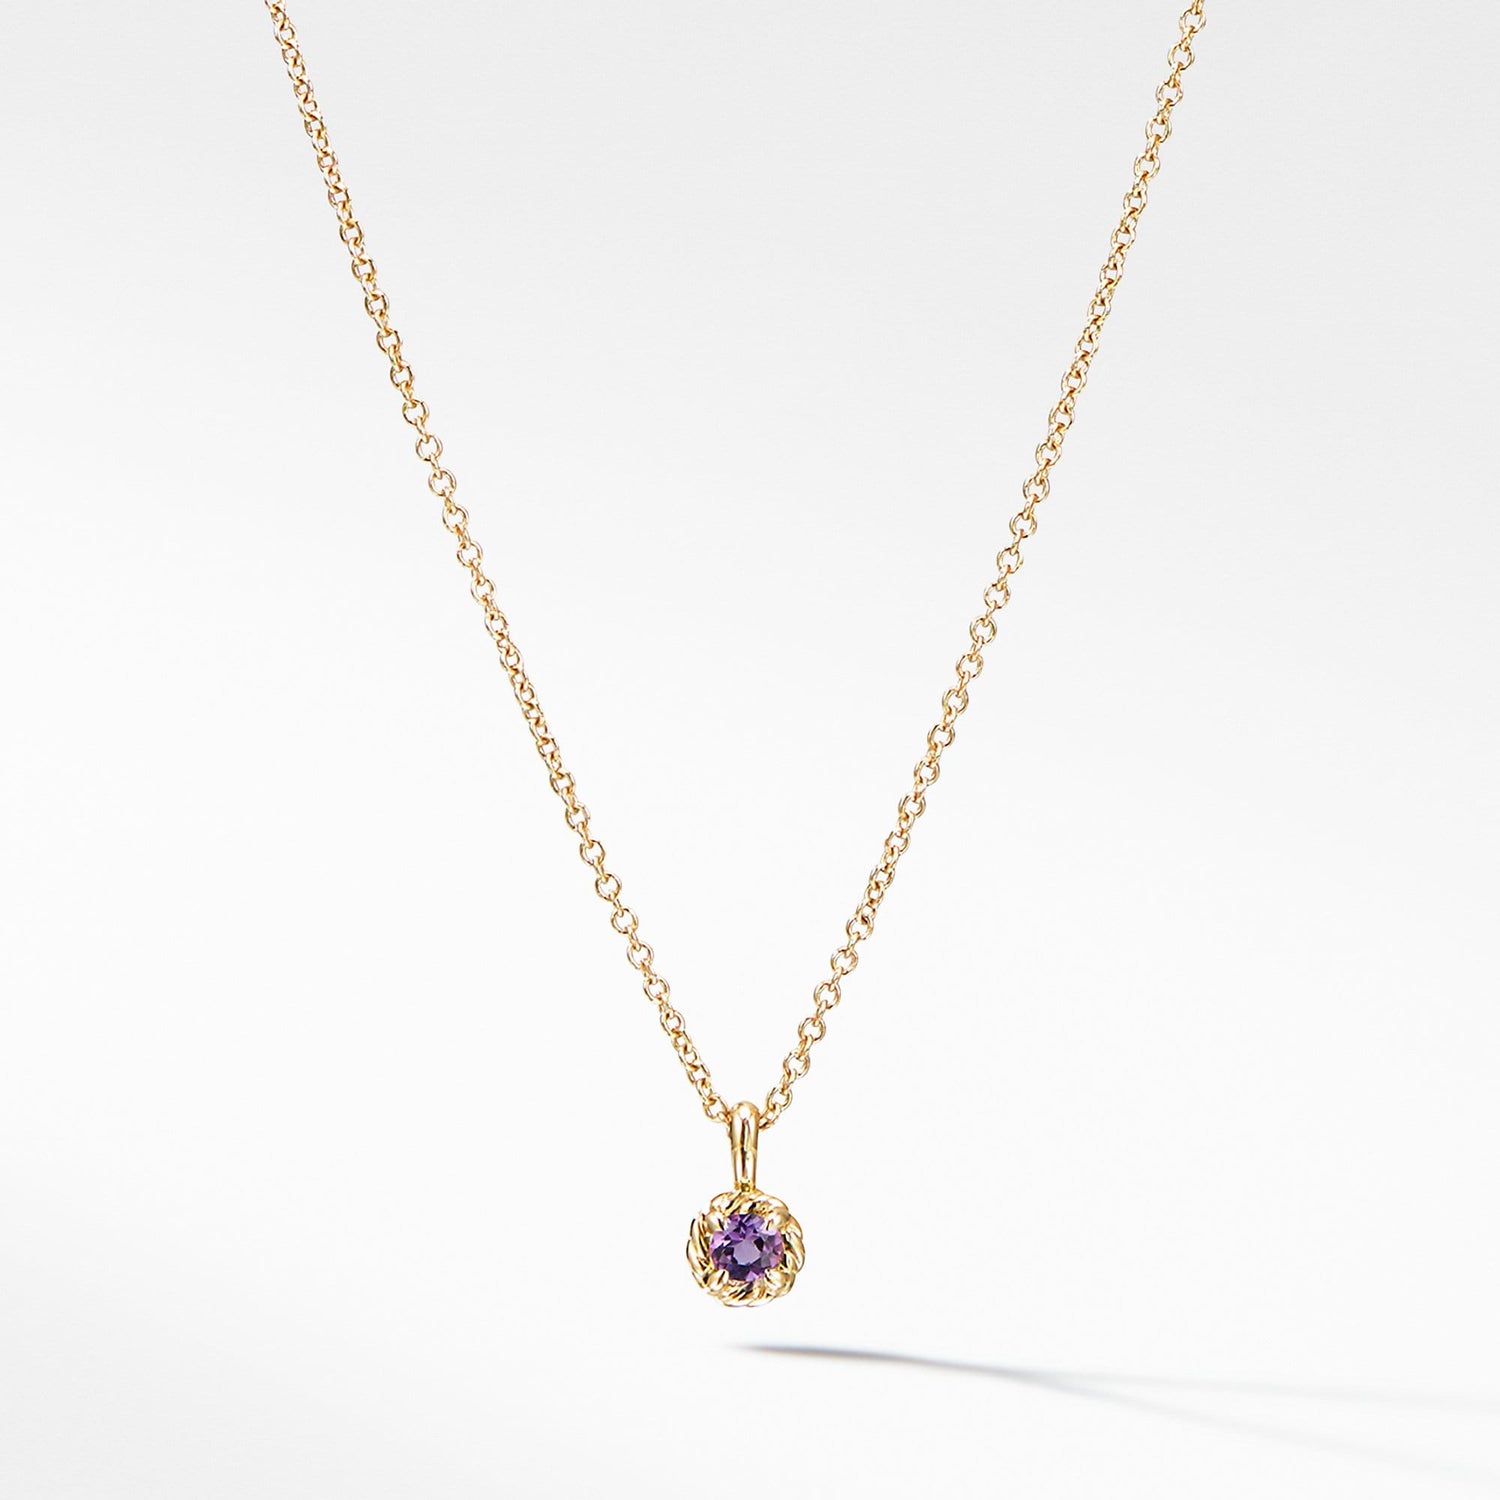 Cable Collectibles Kids Necklace Birthstone Necklace with Amethyst in 18K Gold, 3mm - David Yurman- Diamond Cellar